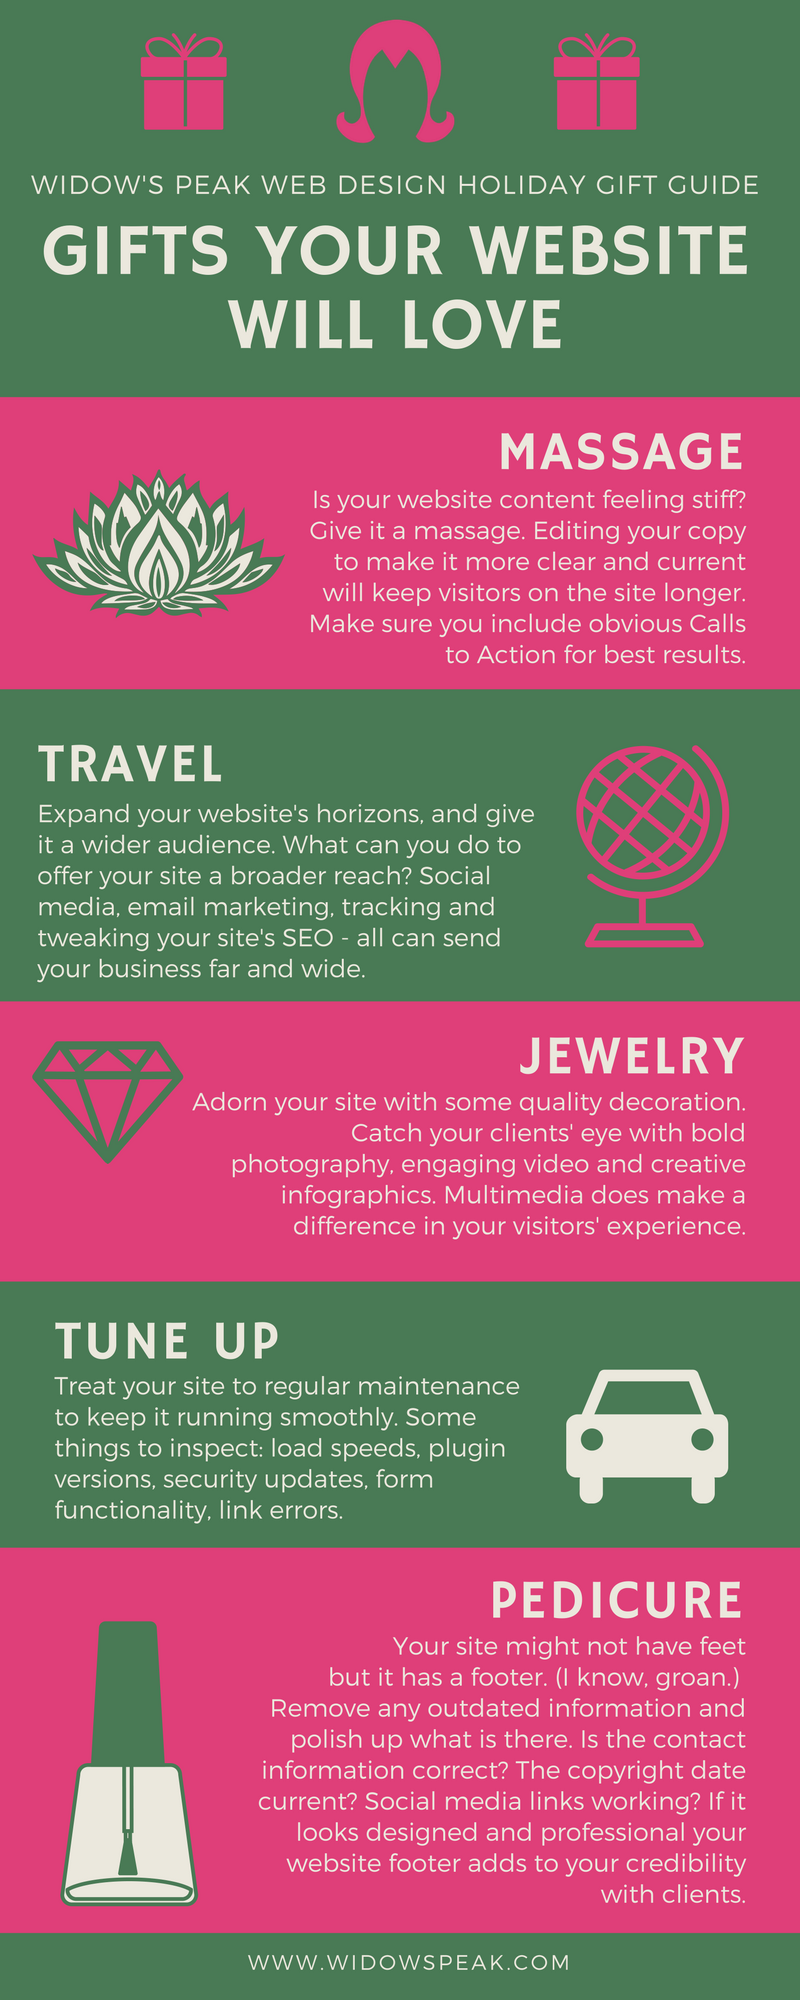 infographic - 2016 Holiday Gift Guide for your Website 